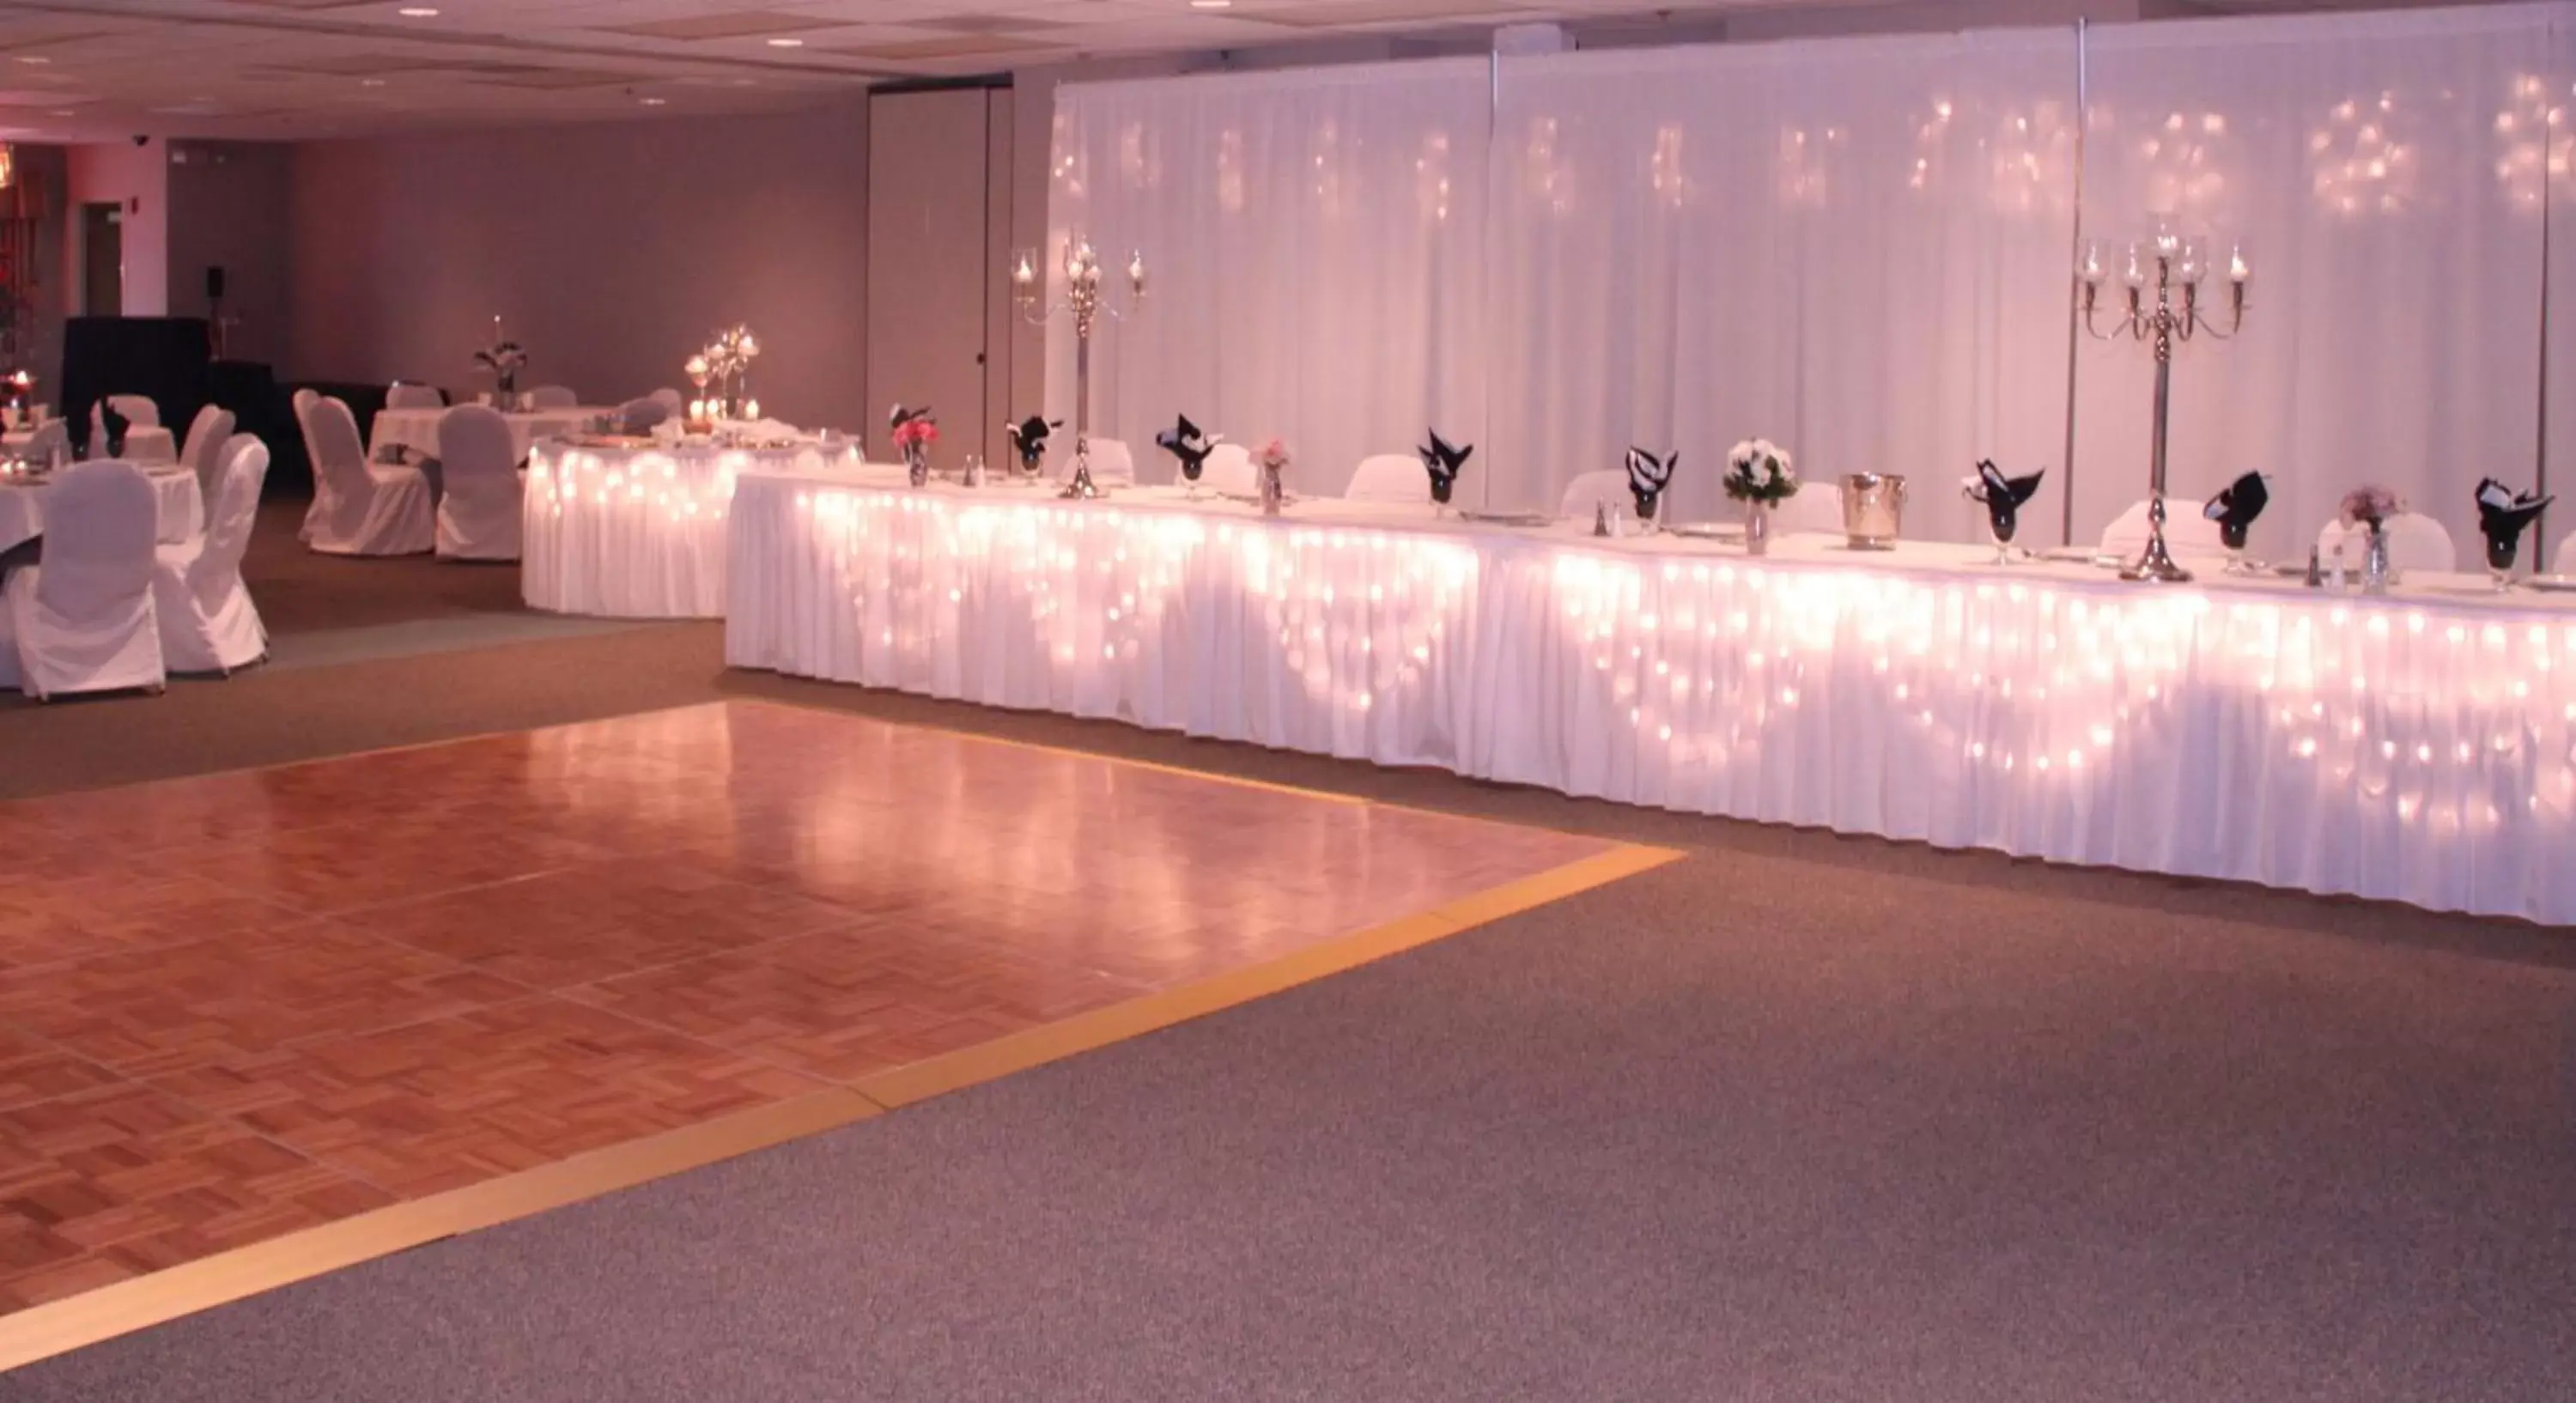 Banquet/Function facilities, Banquet Facilities in Baymont by Wyndham Des Moines Airport